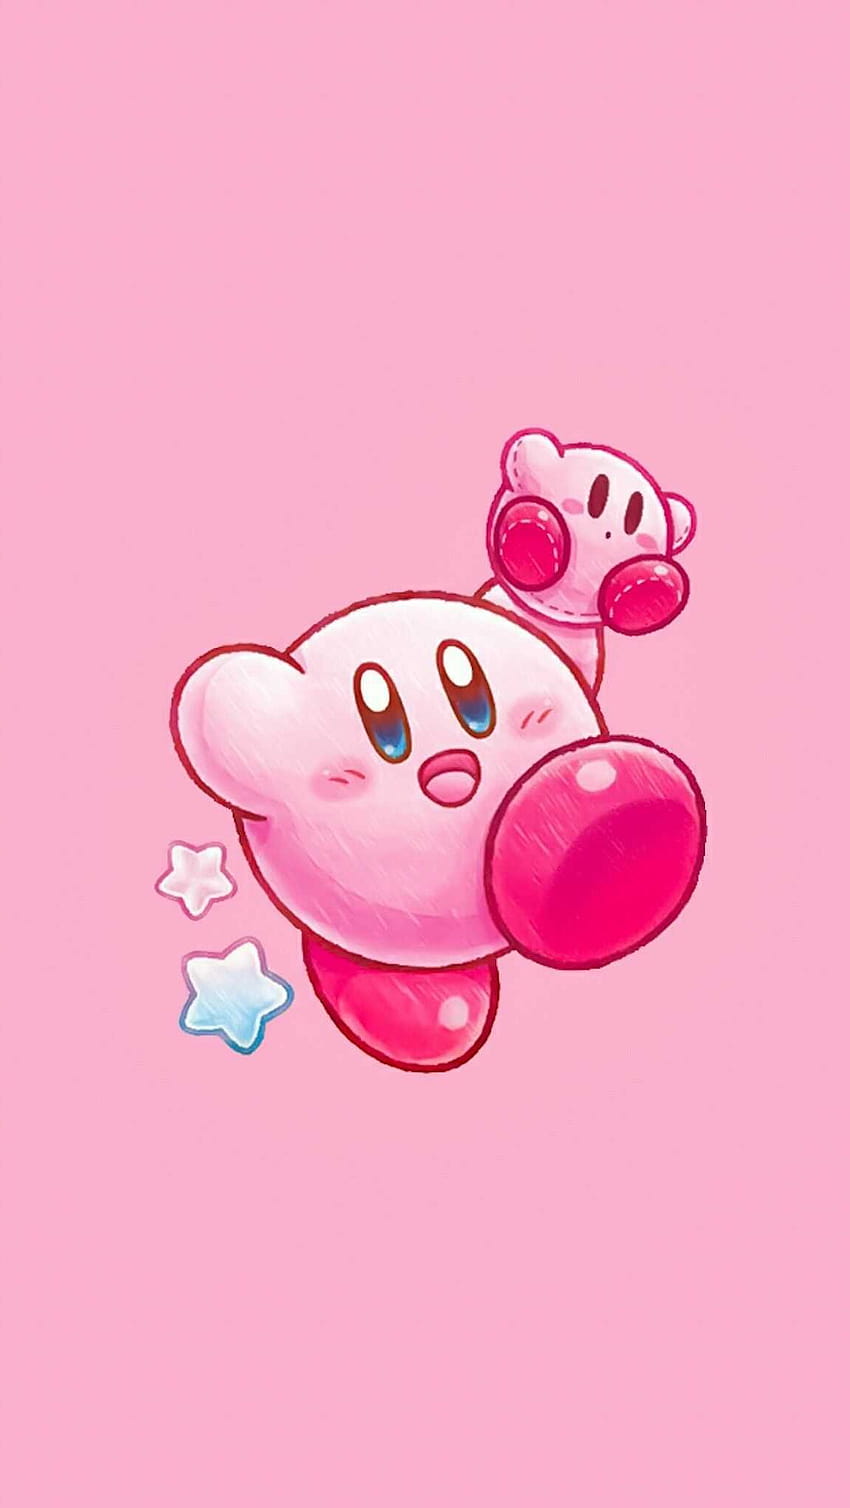 Iphone 6 wallpaper Kirby by Shelbobaggins on DeviantArt